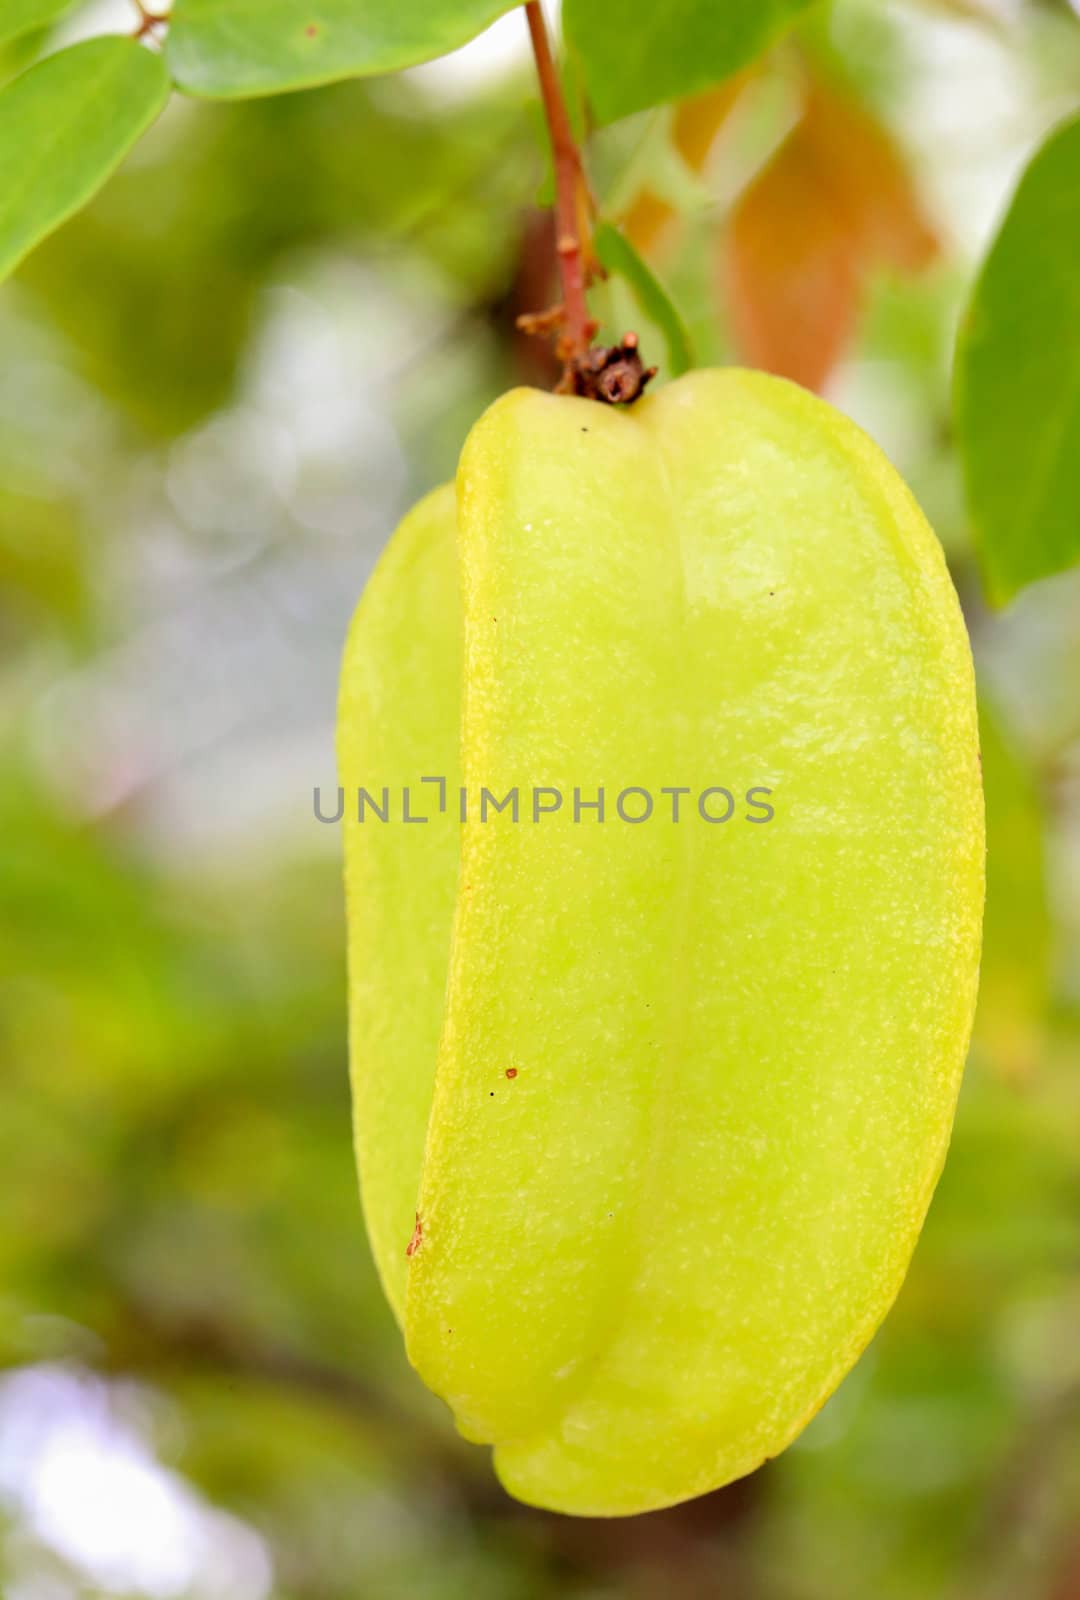 Star apple fruit on the tree ,in thailand by myrainjom01